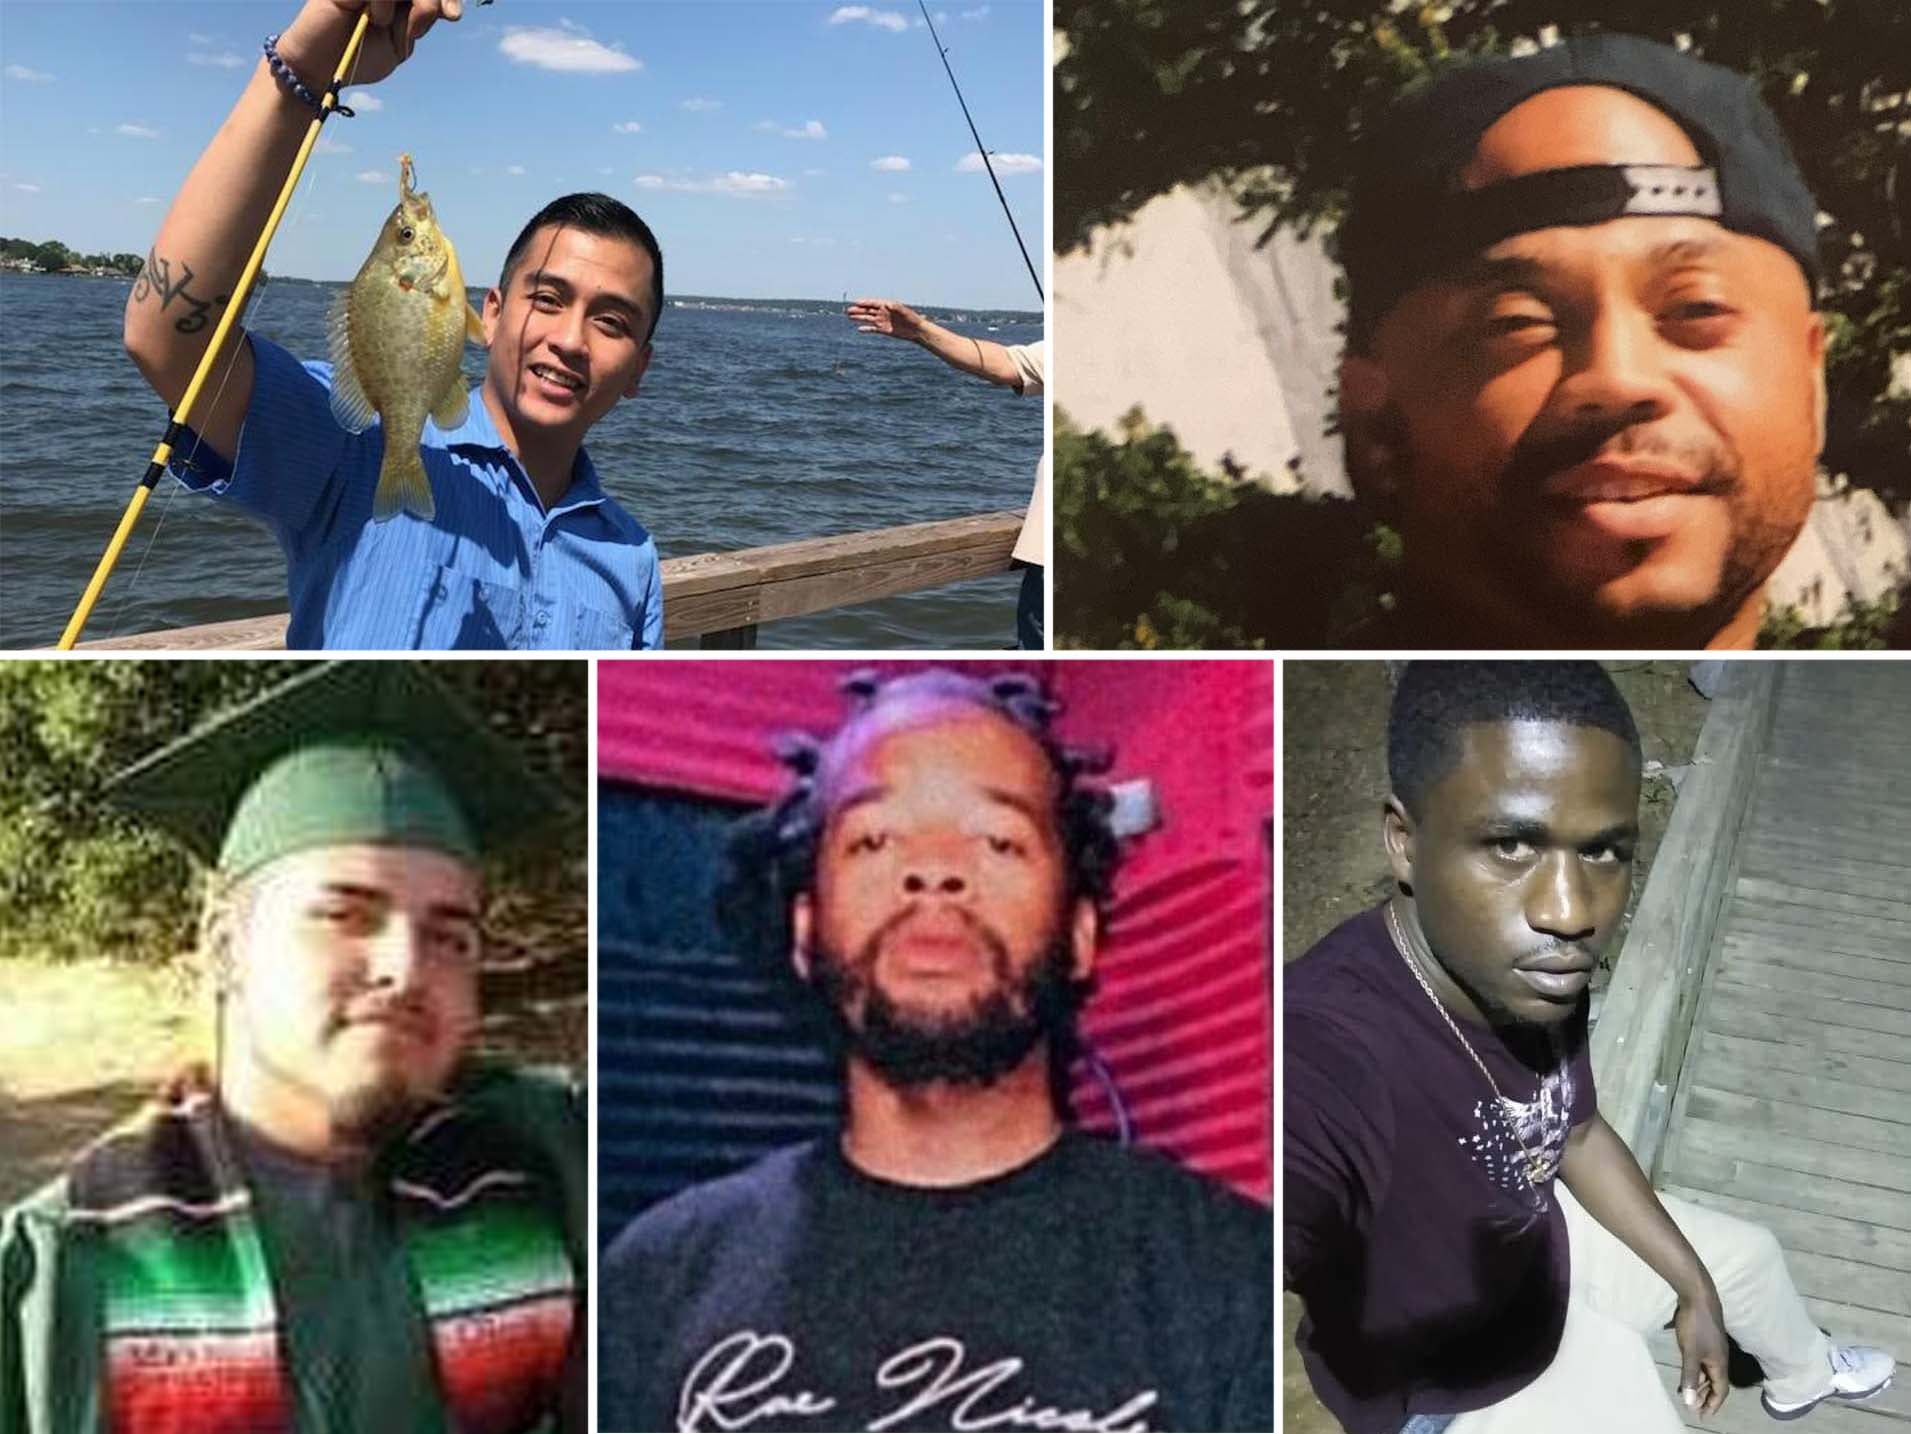 Clockwise from top left: Angelo Quinto, Kurt Reinhold, Kendrell Watkins, Ashton Pinke and Mario Gonzalez were unarmed when killed by police